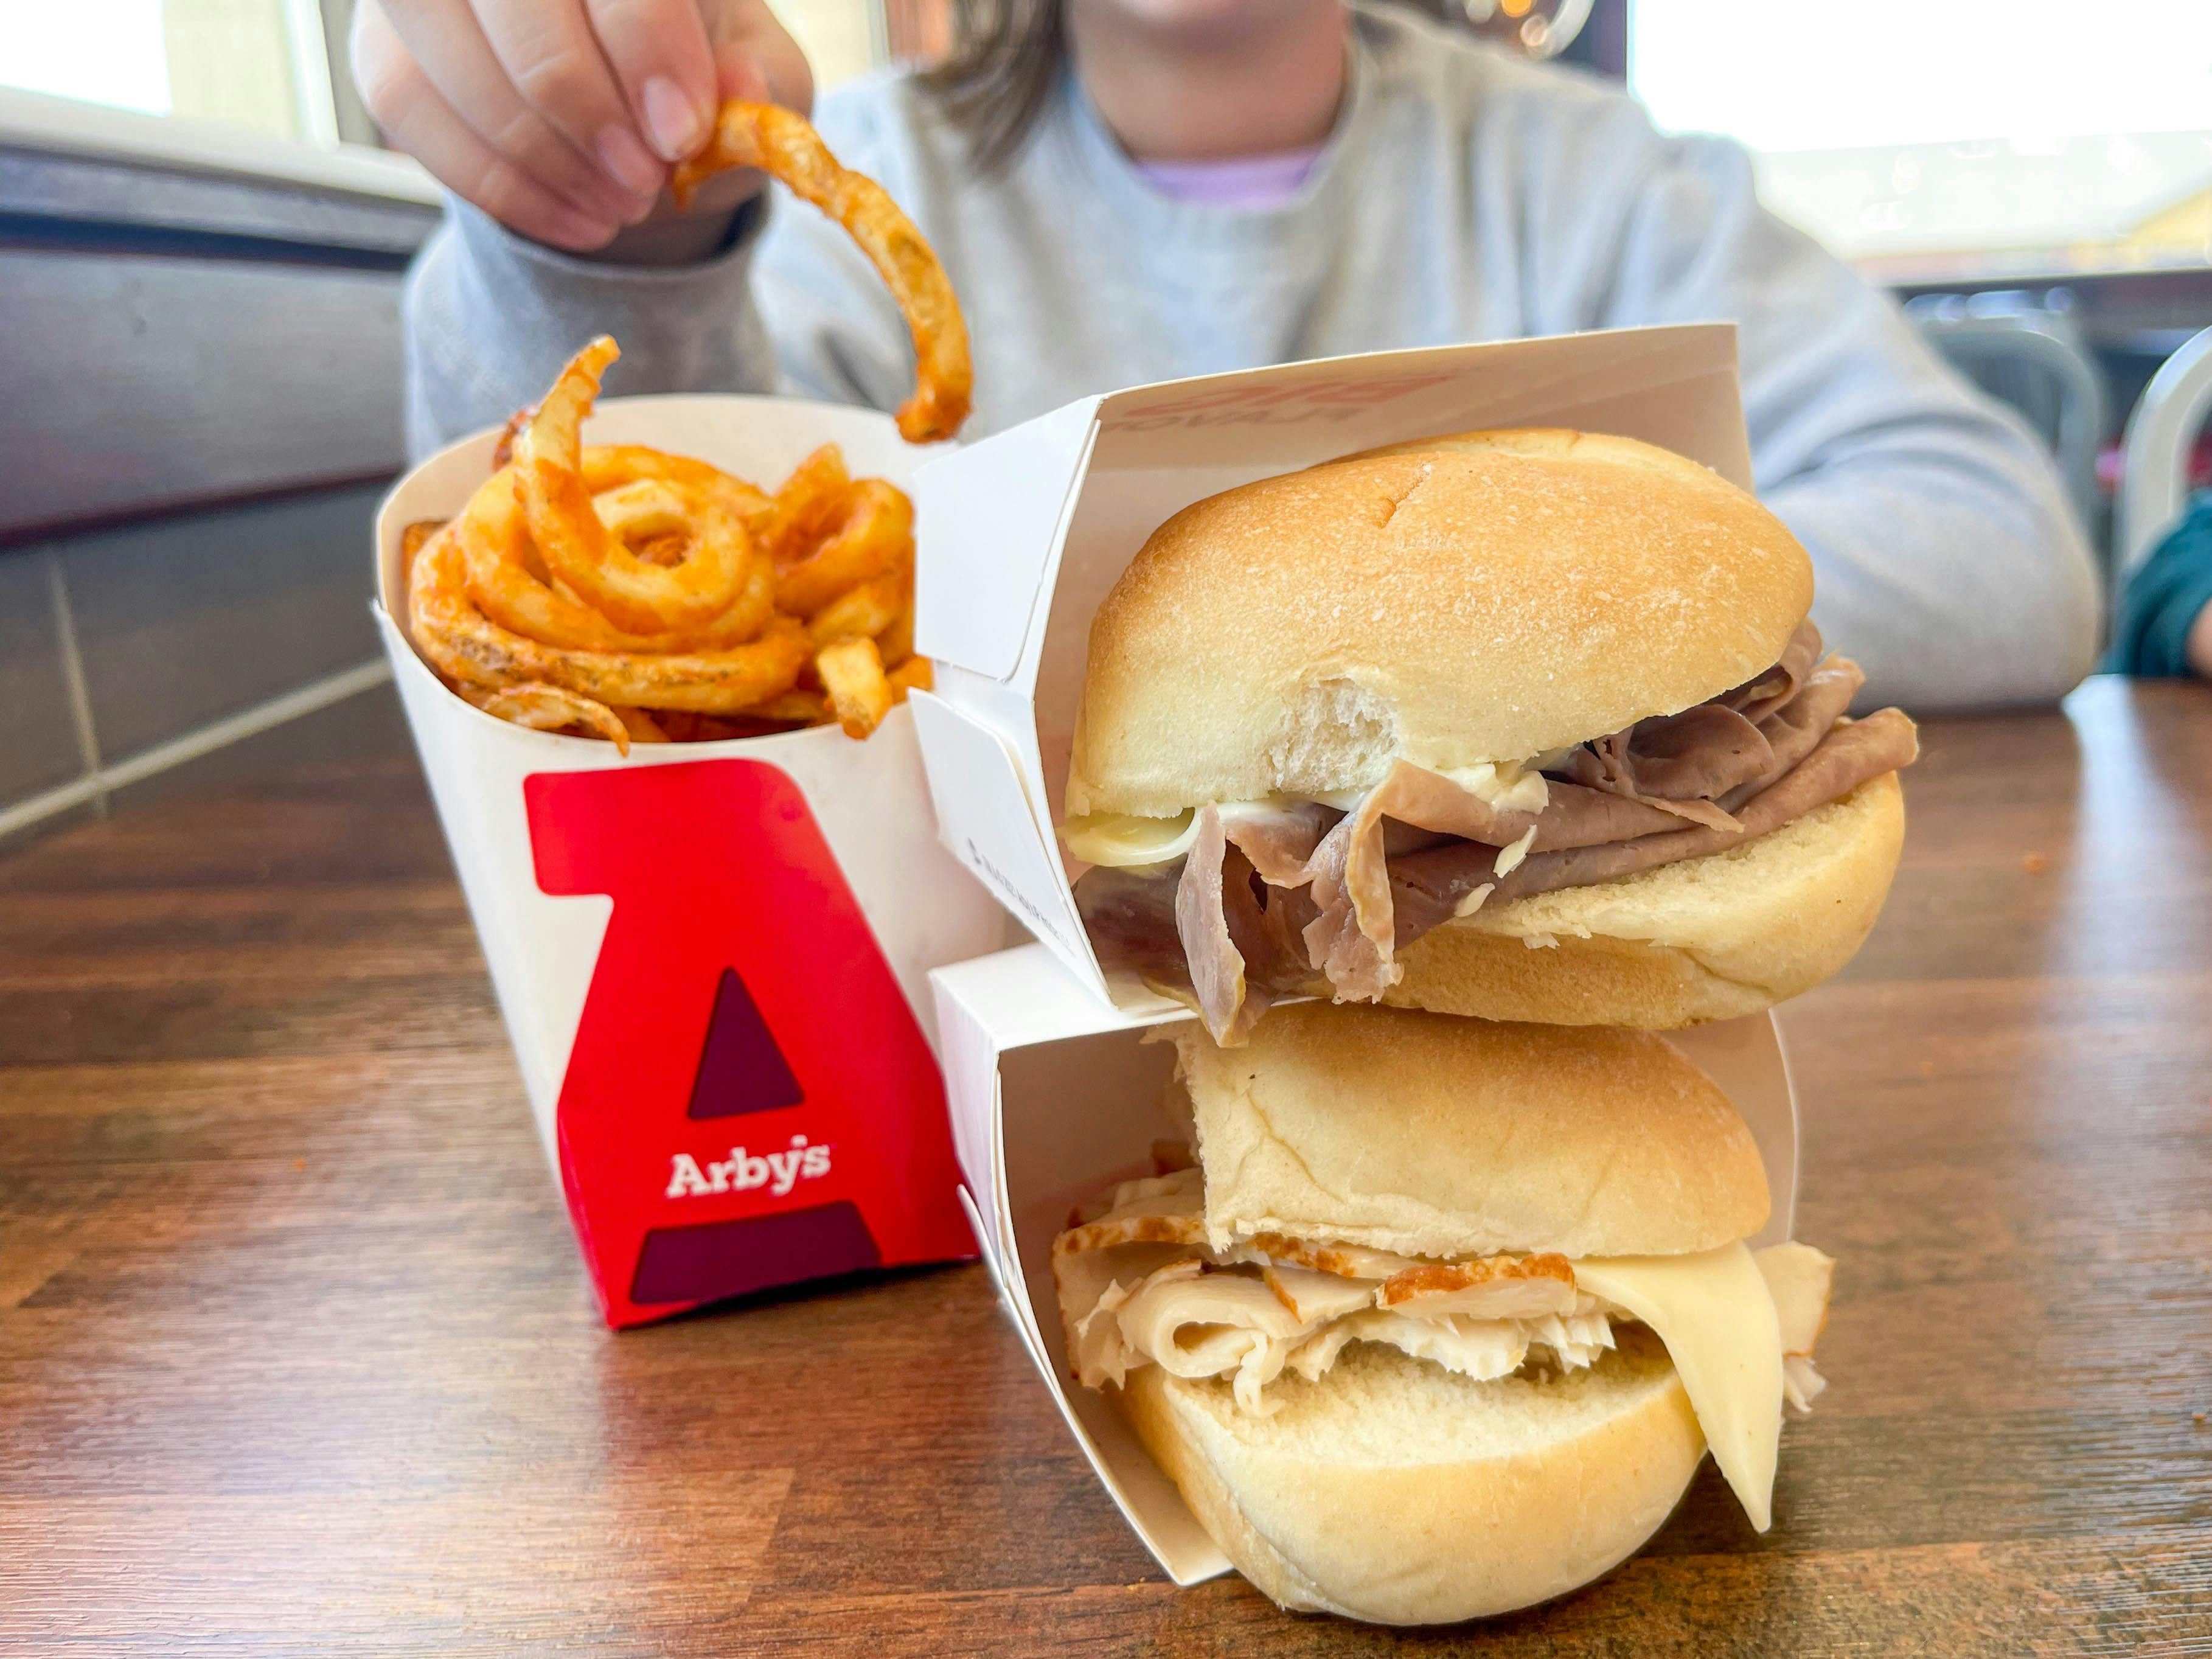 Arby's Coupons & Deals - Save $10 in December 2021 - wide 2